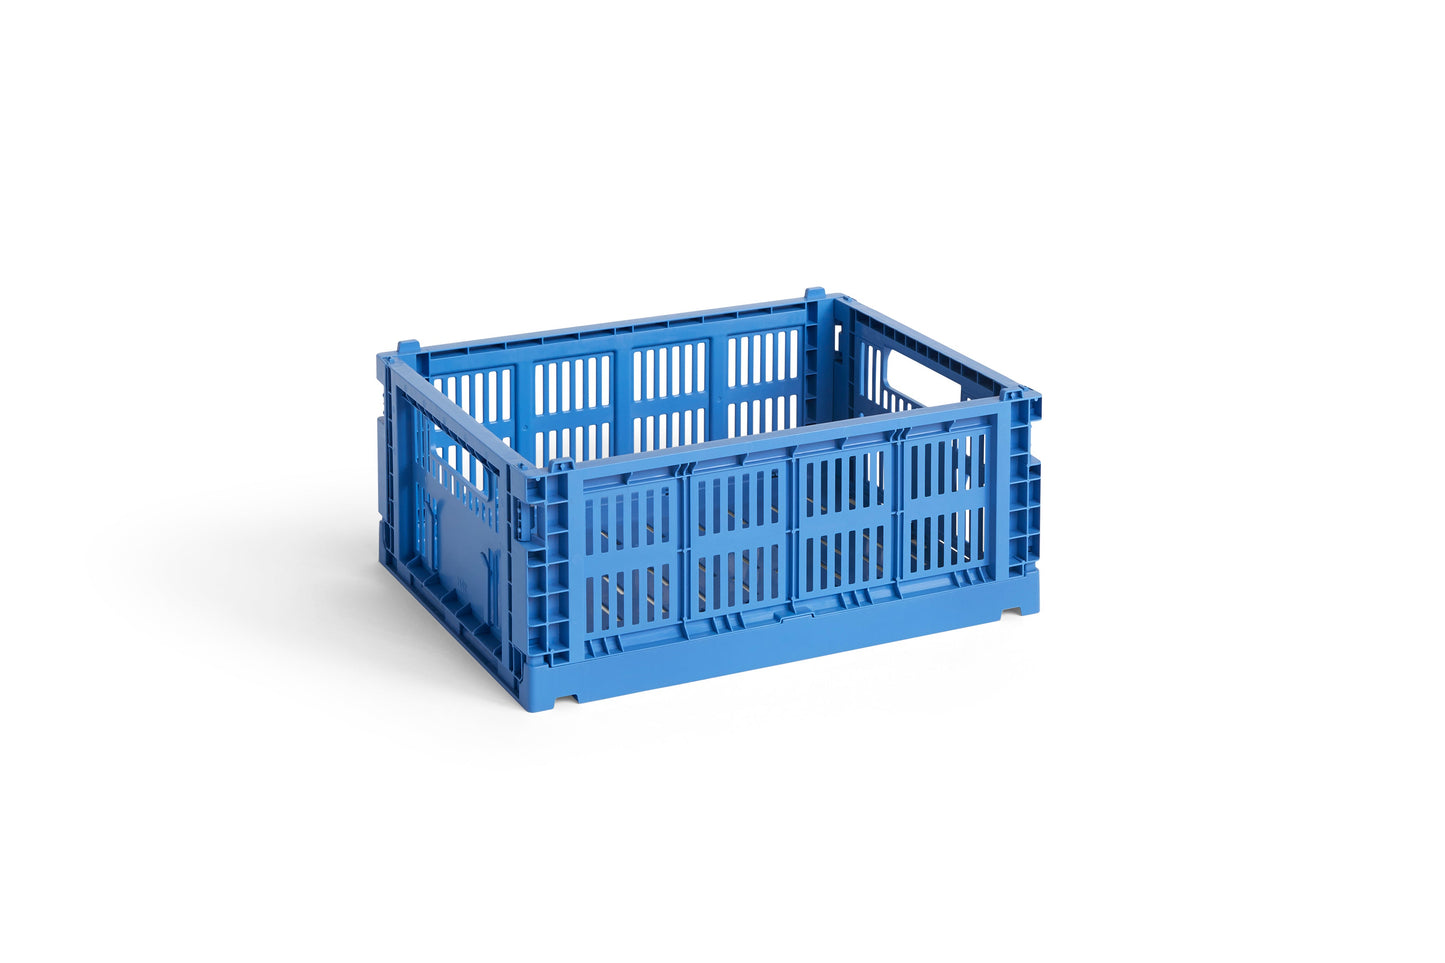 HAY Colour Crate